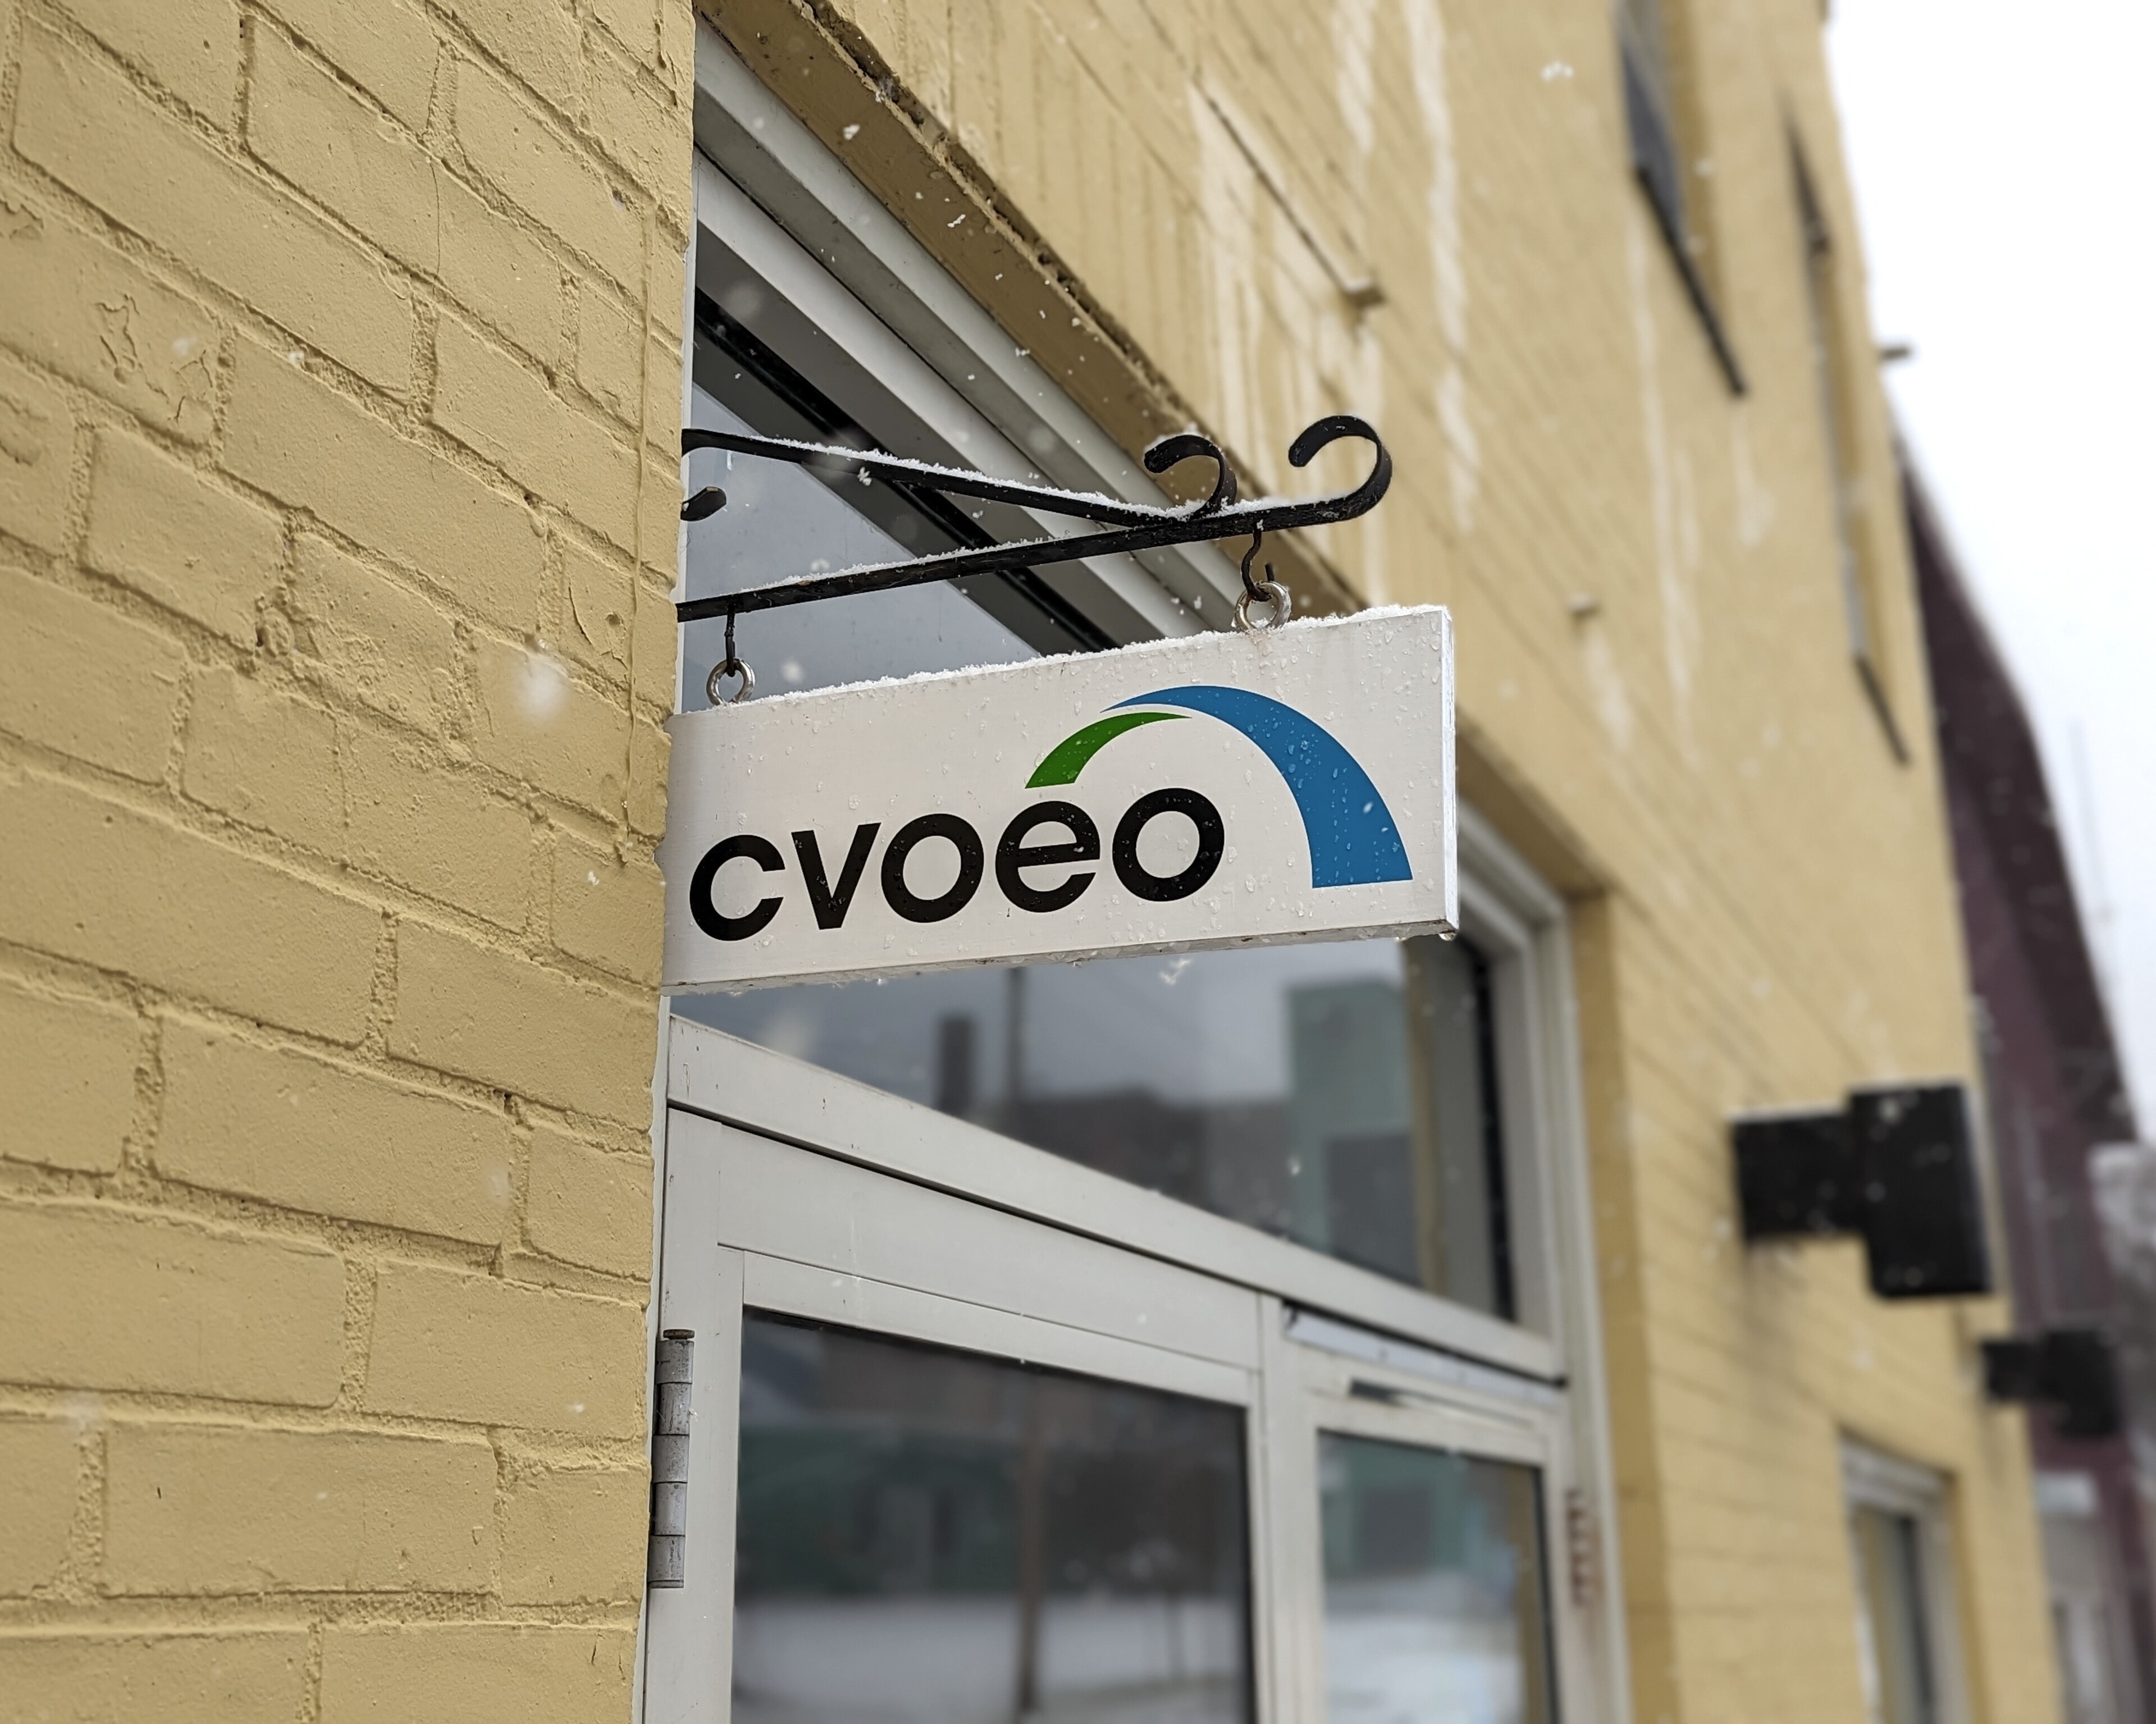 CVOEO building and sign